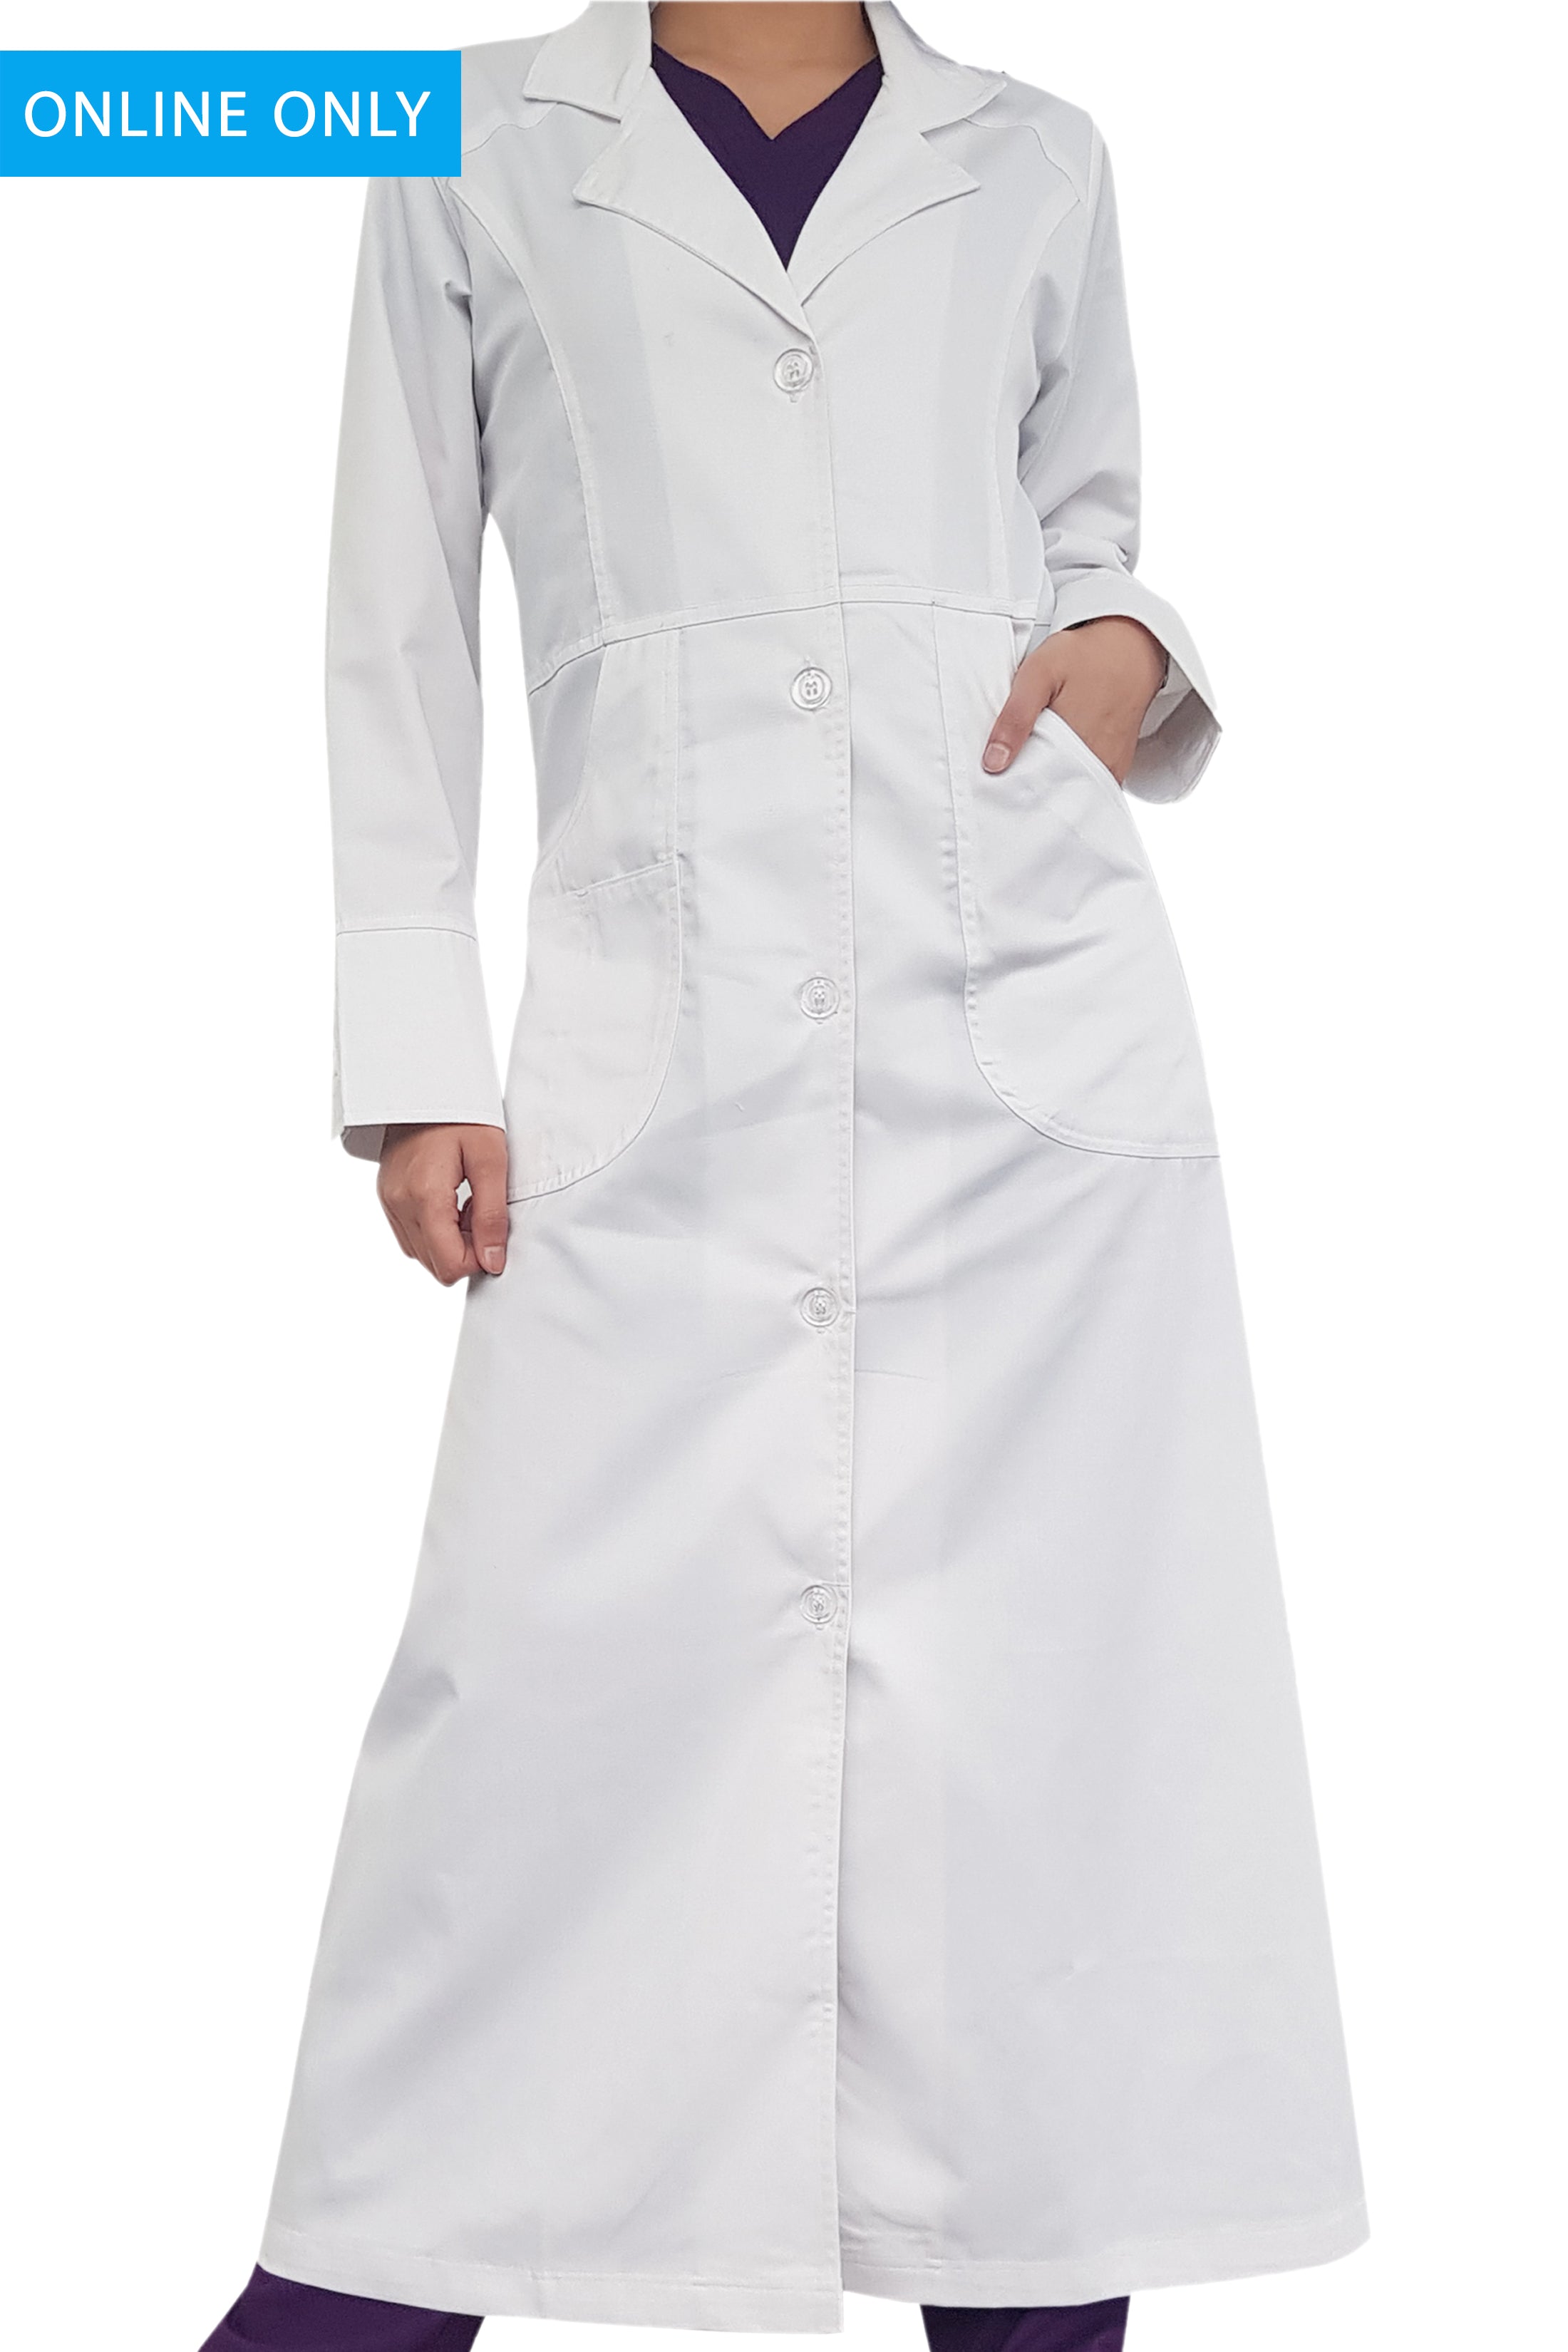 products-labcoat3-jpg